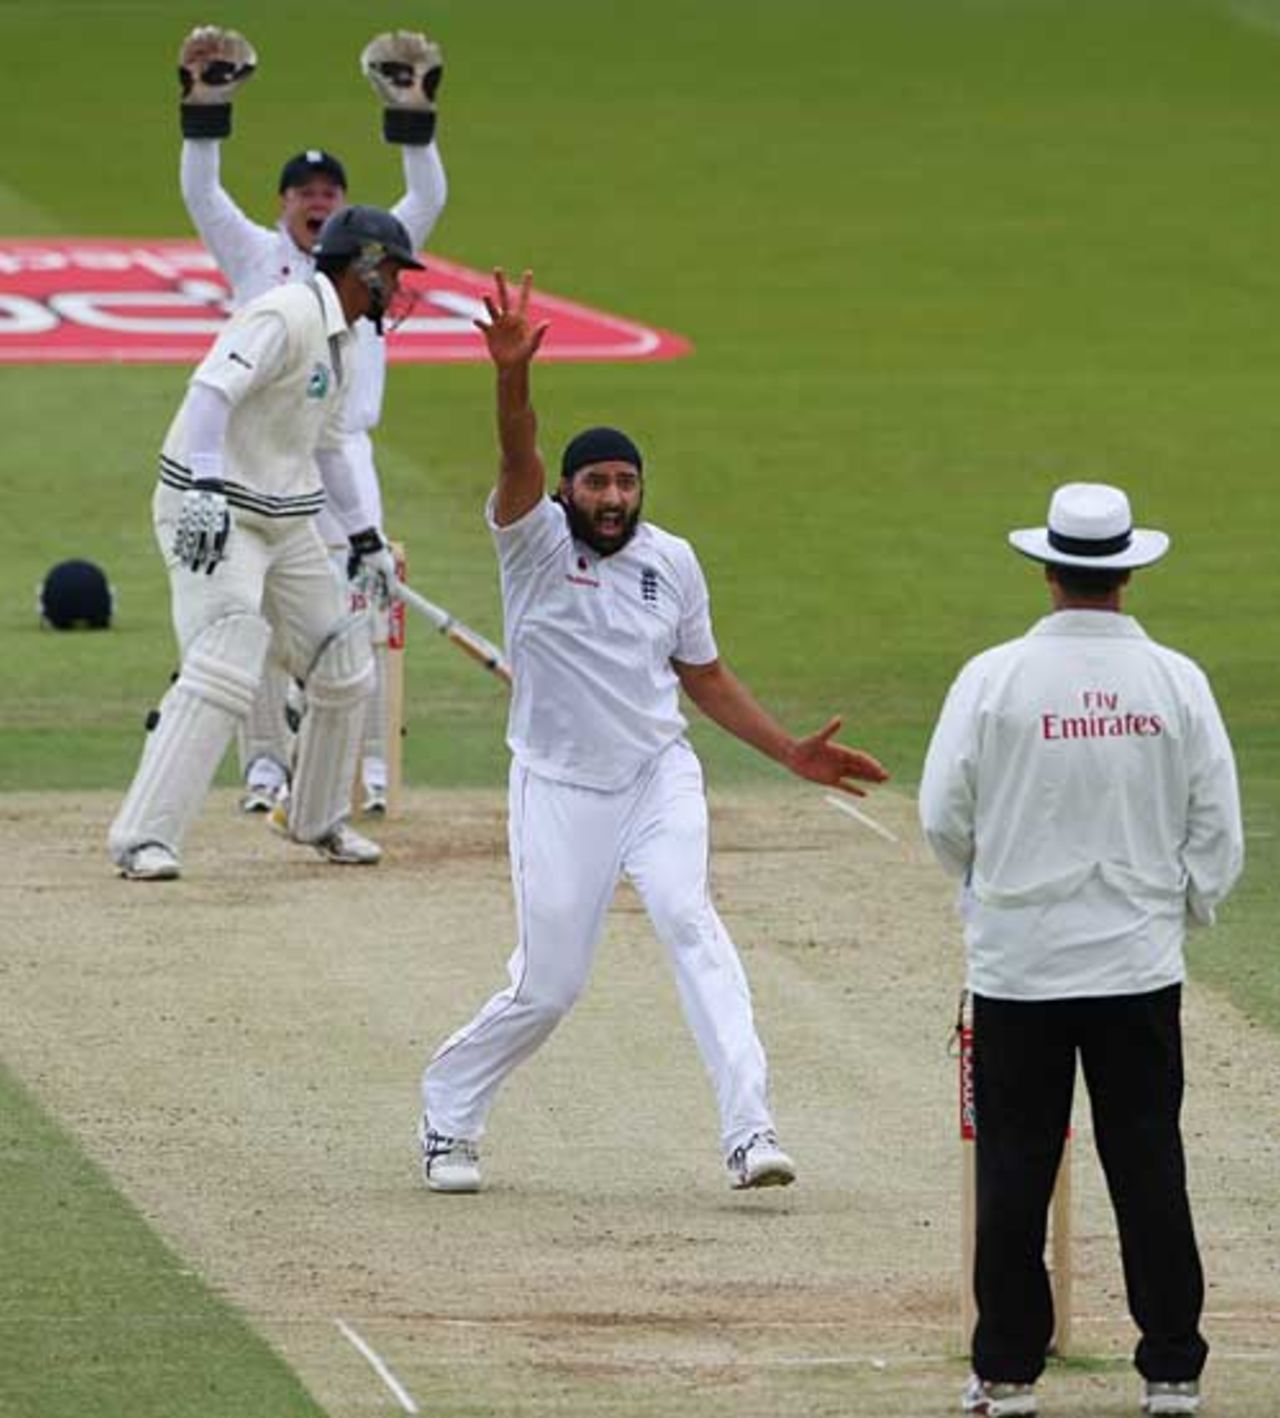 Monty Panesar traps Ross Taylor lbw, England v New Zealand, 1st Test, Lord's, May 19, 2008